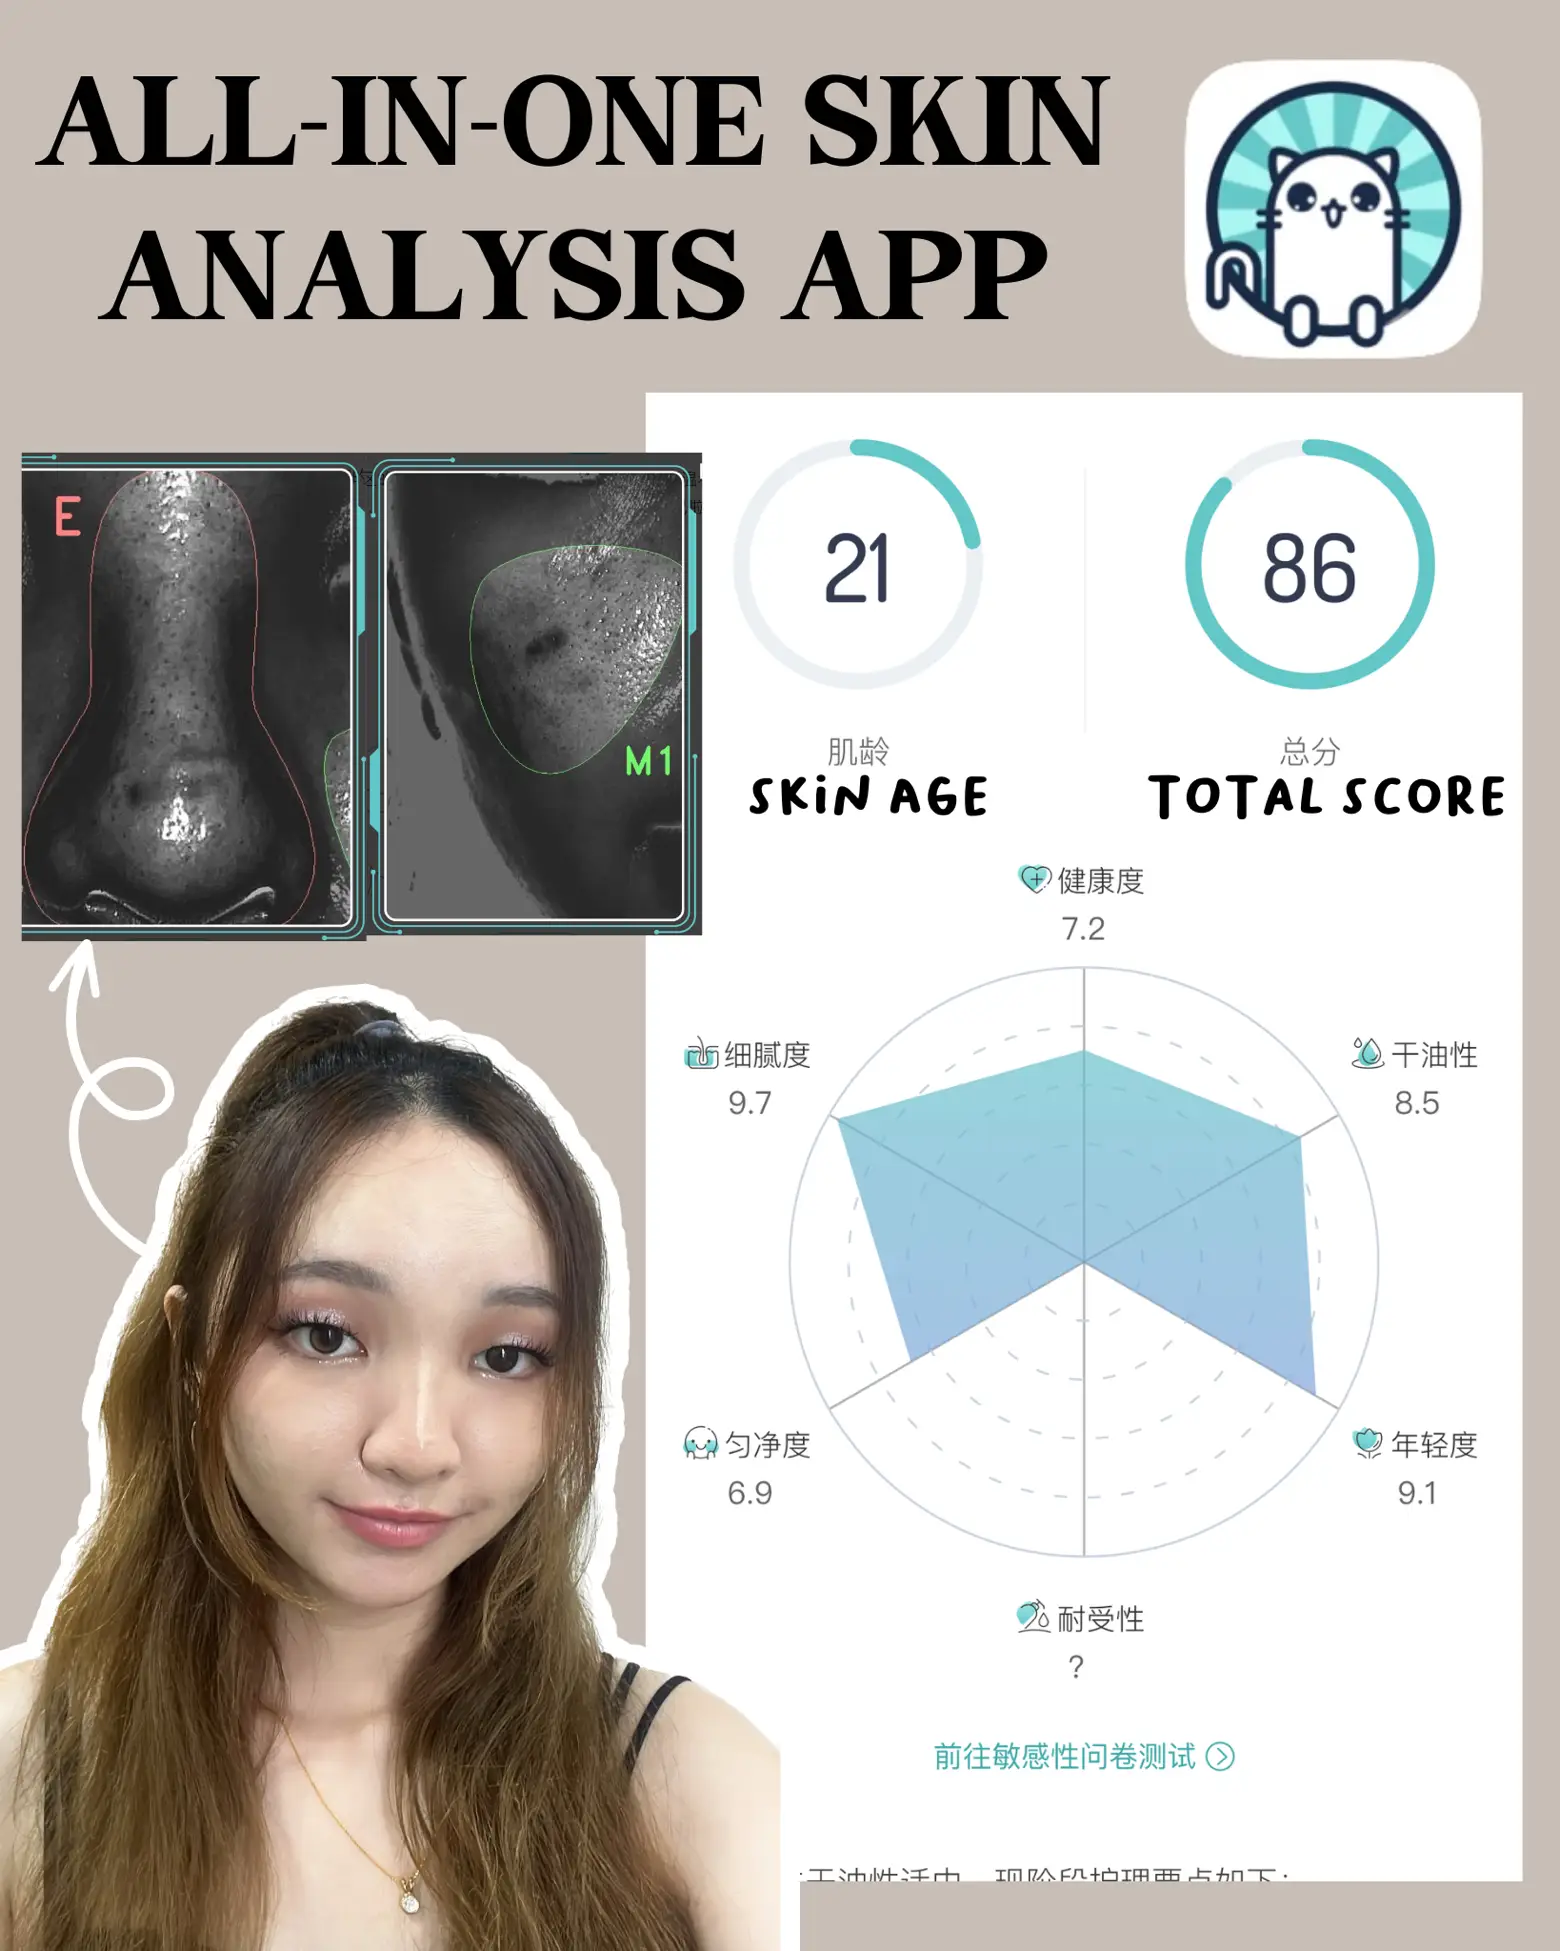 TEST YOUR SKIN AGE (and more!) WITH THIS APP! 📱🤯's images(0)